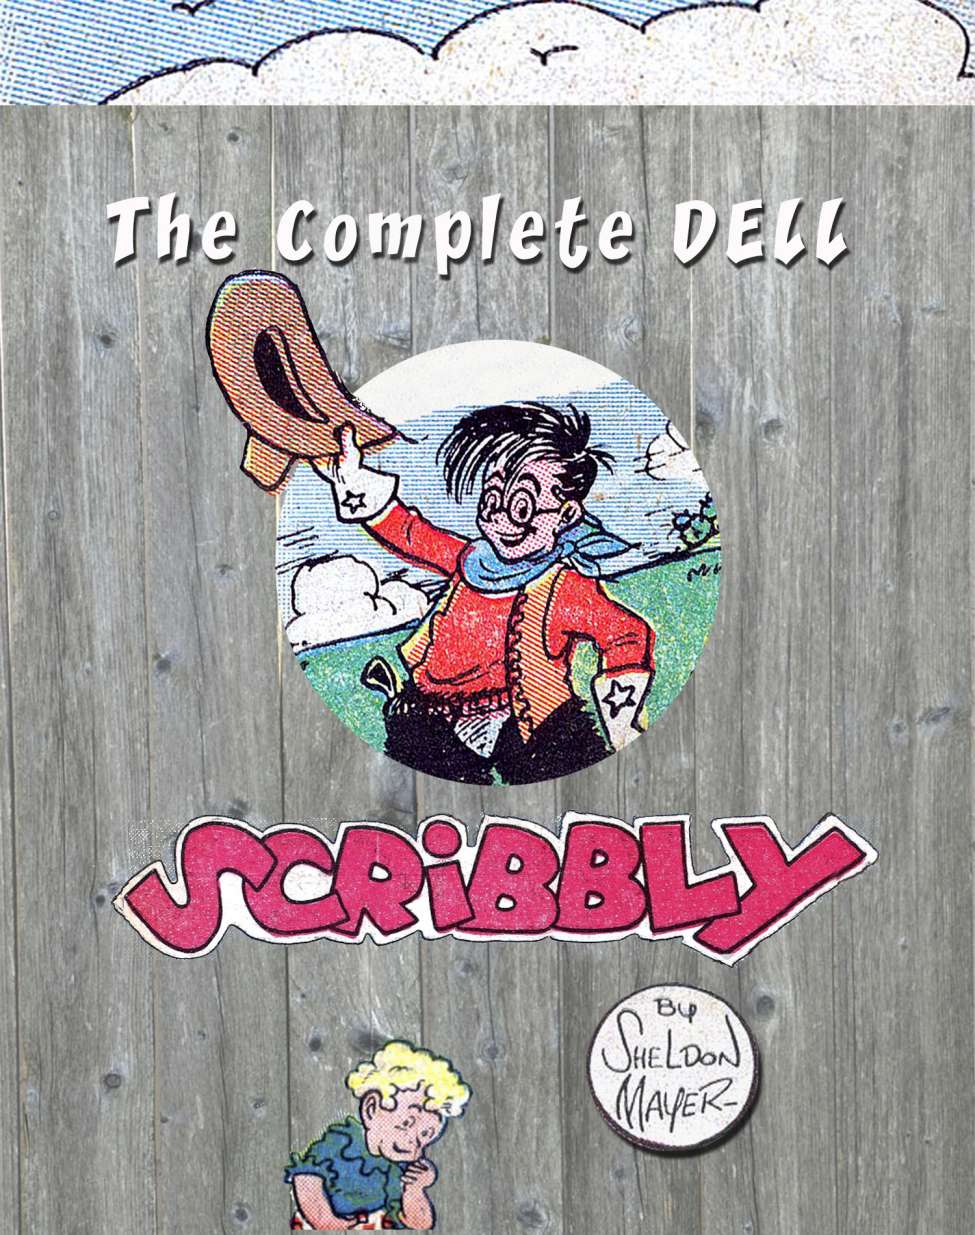 Book Cover For The Complete Dell Scribbly Collection